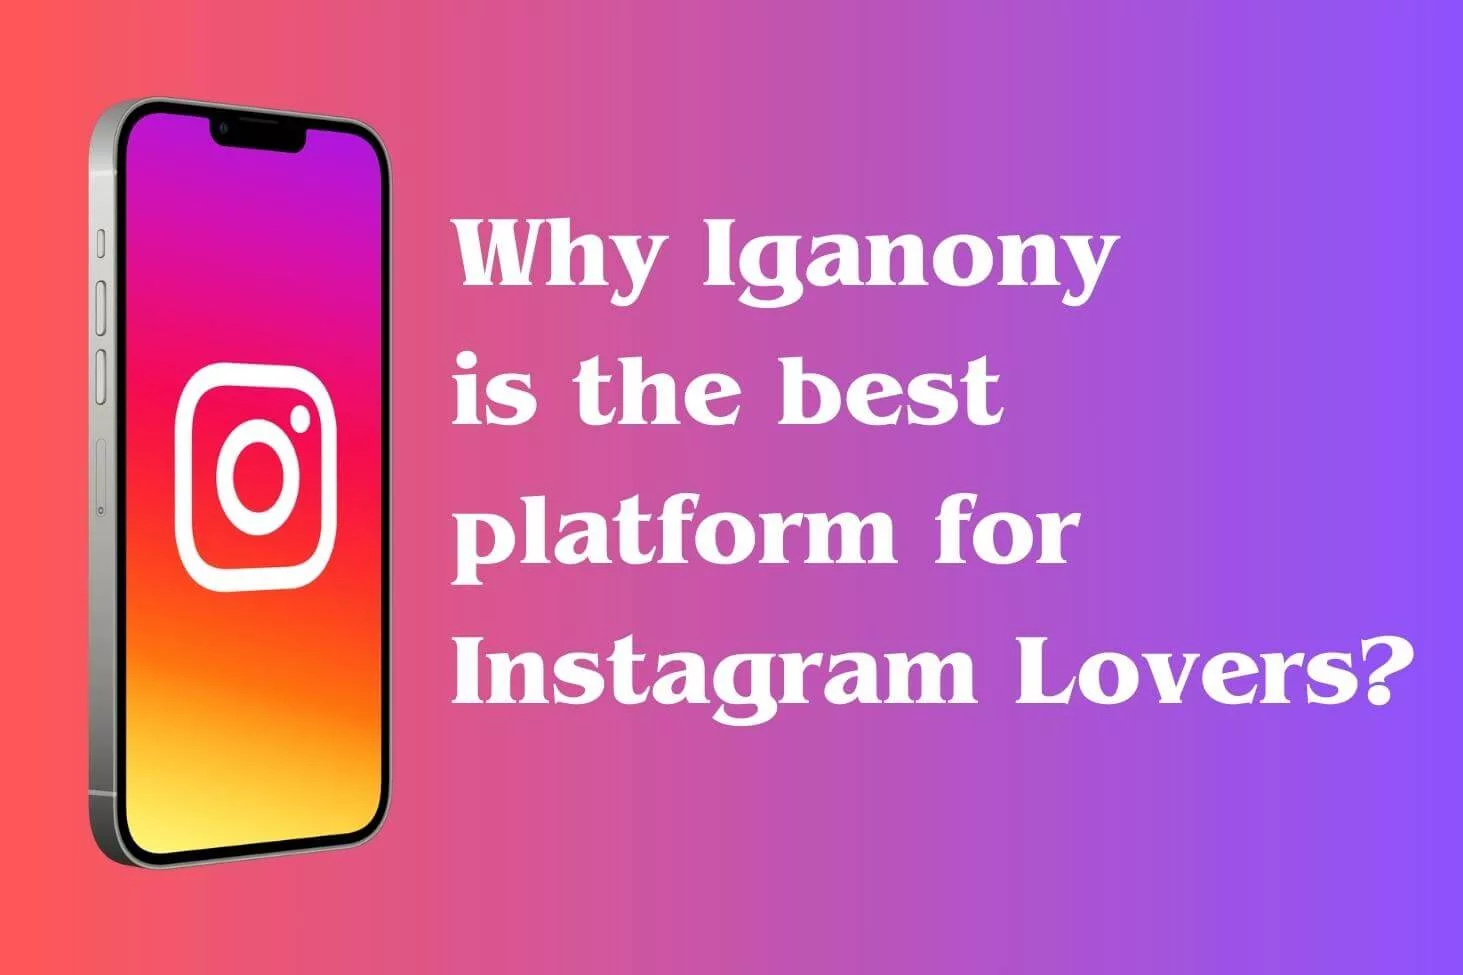 Why Iganony is the best platform for Instagram Lovers?